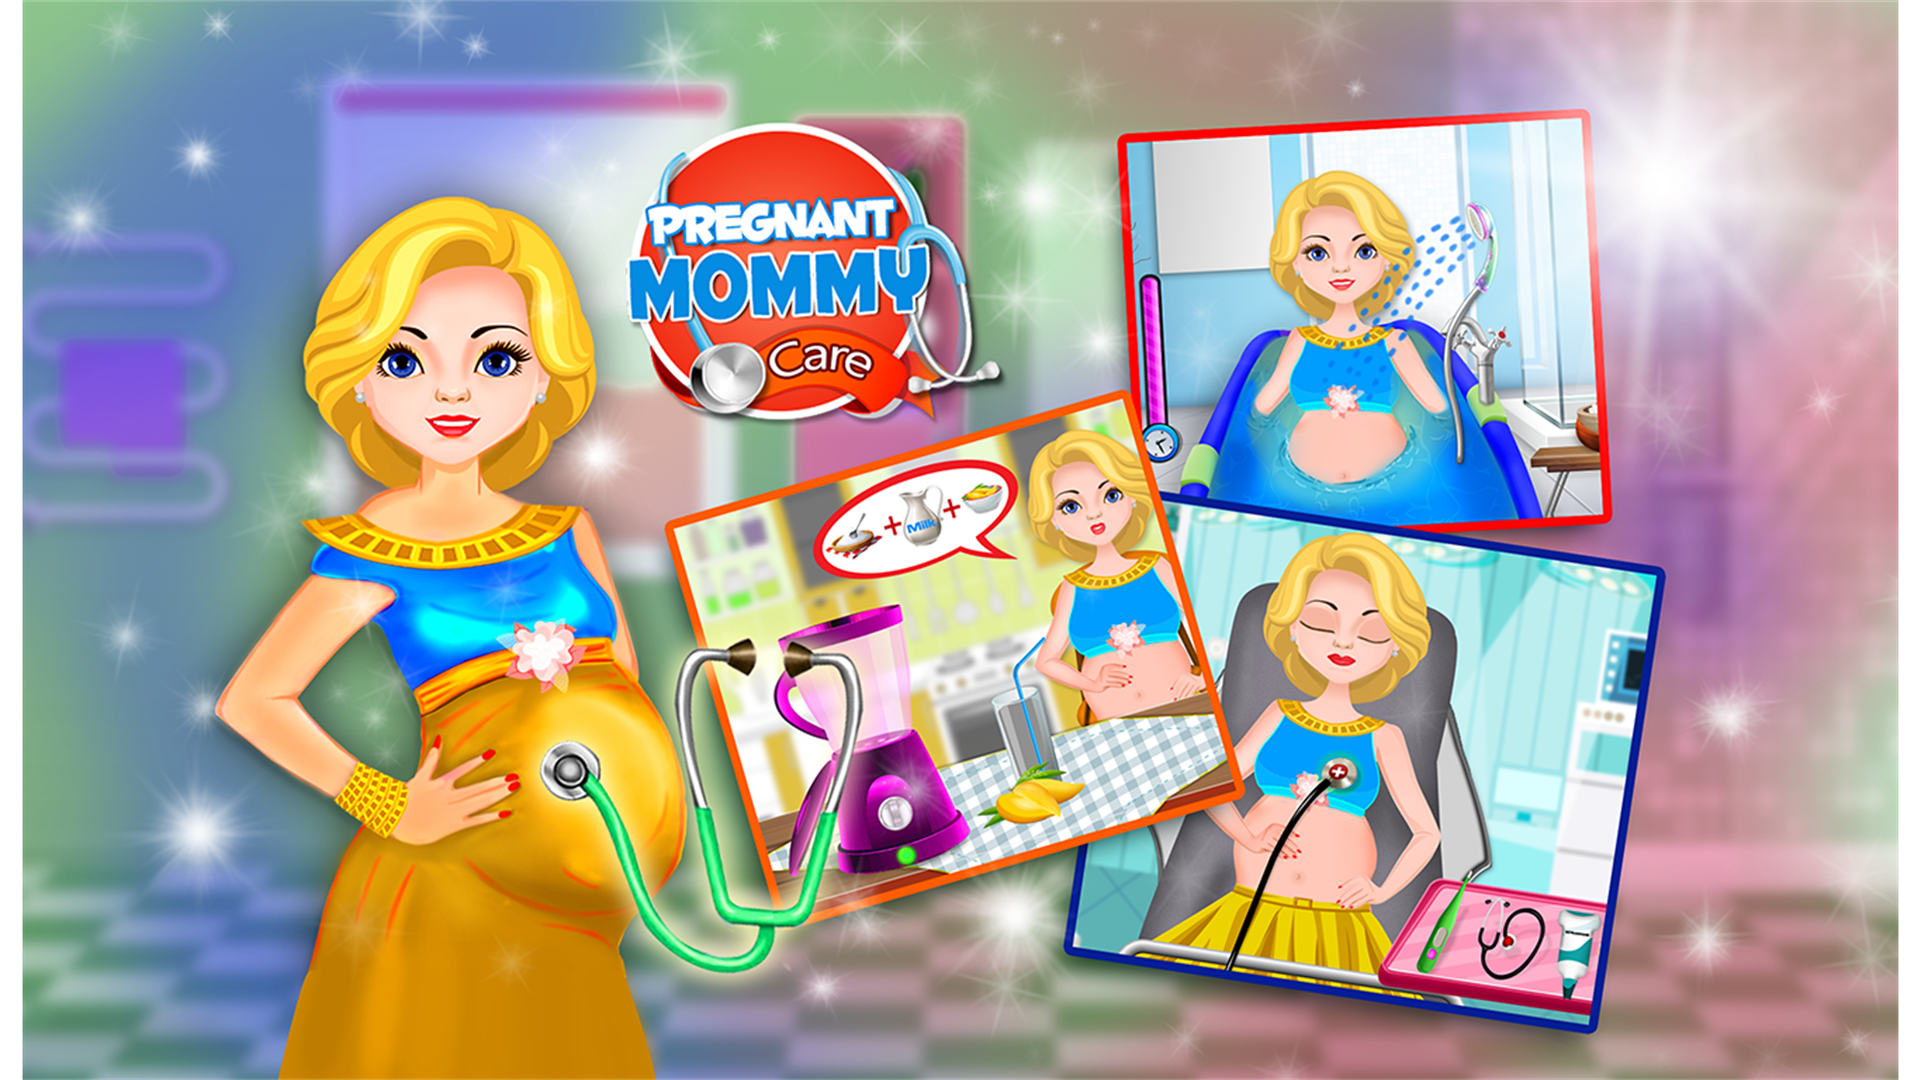 Mom Ana Newborn Baby Care - Official game in the Microsoft Store